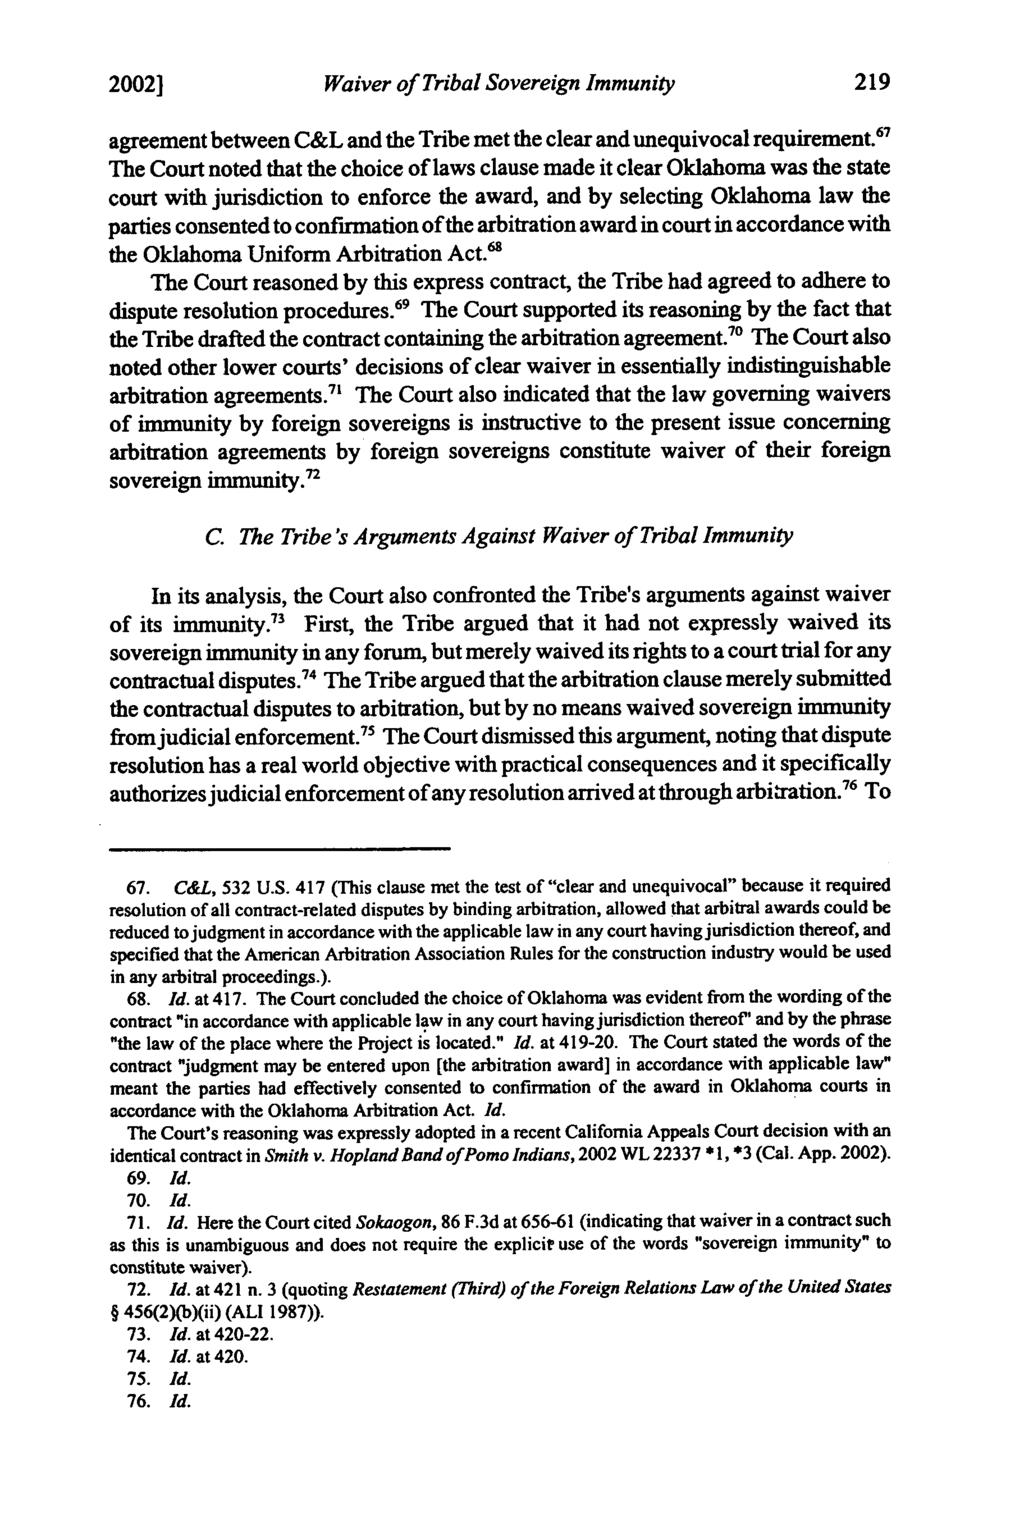 2002] Huitsing: Huitsing: Ability of Native American Tribes Waiver of Tribal Sovereign Immunity agreement between C&L and the Tribe met the clear and unequivocal requirement.